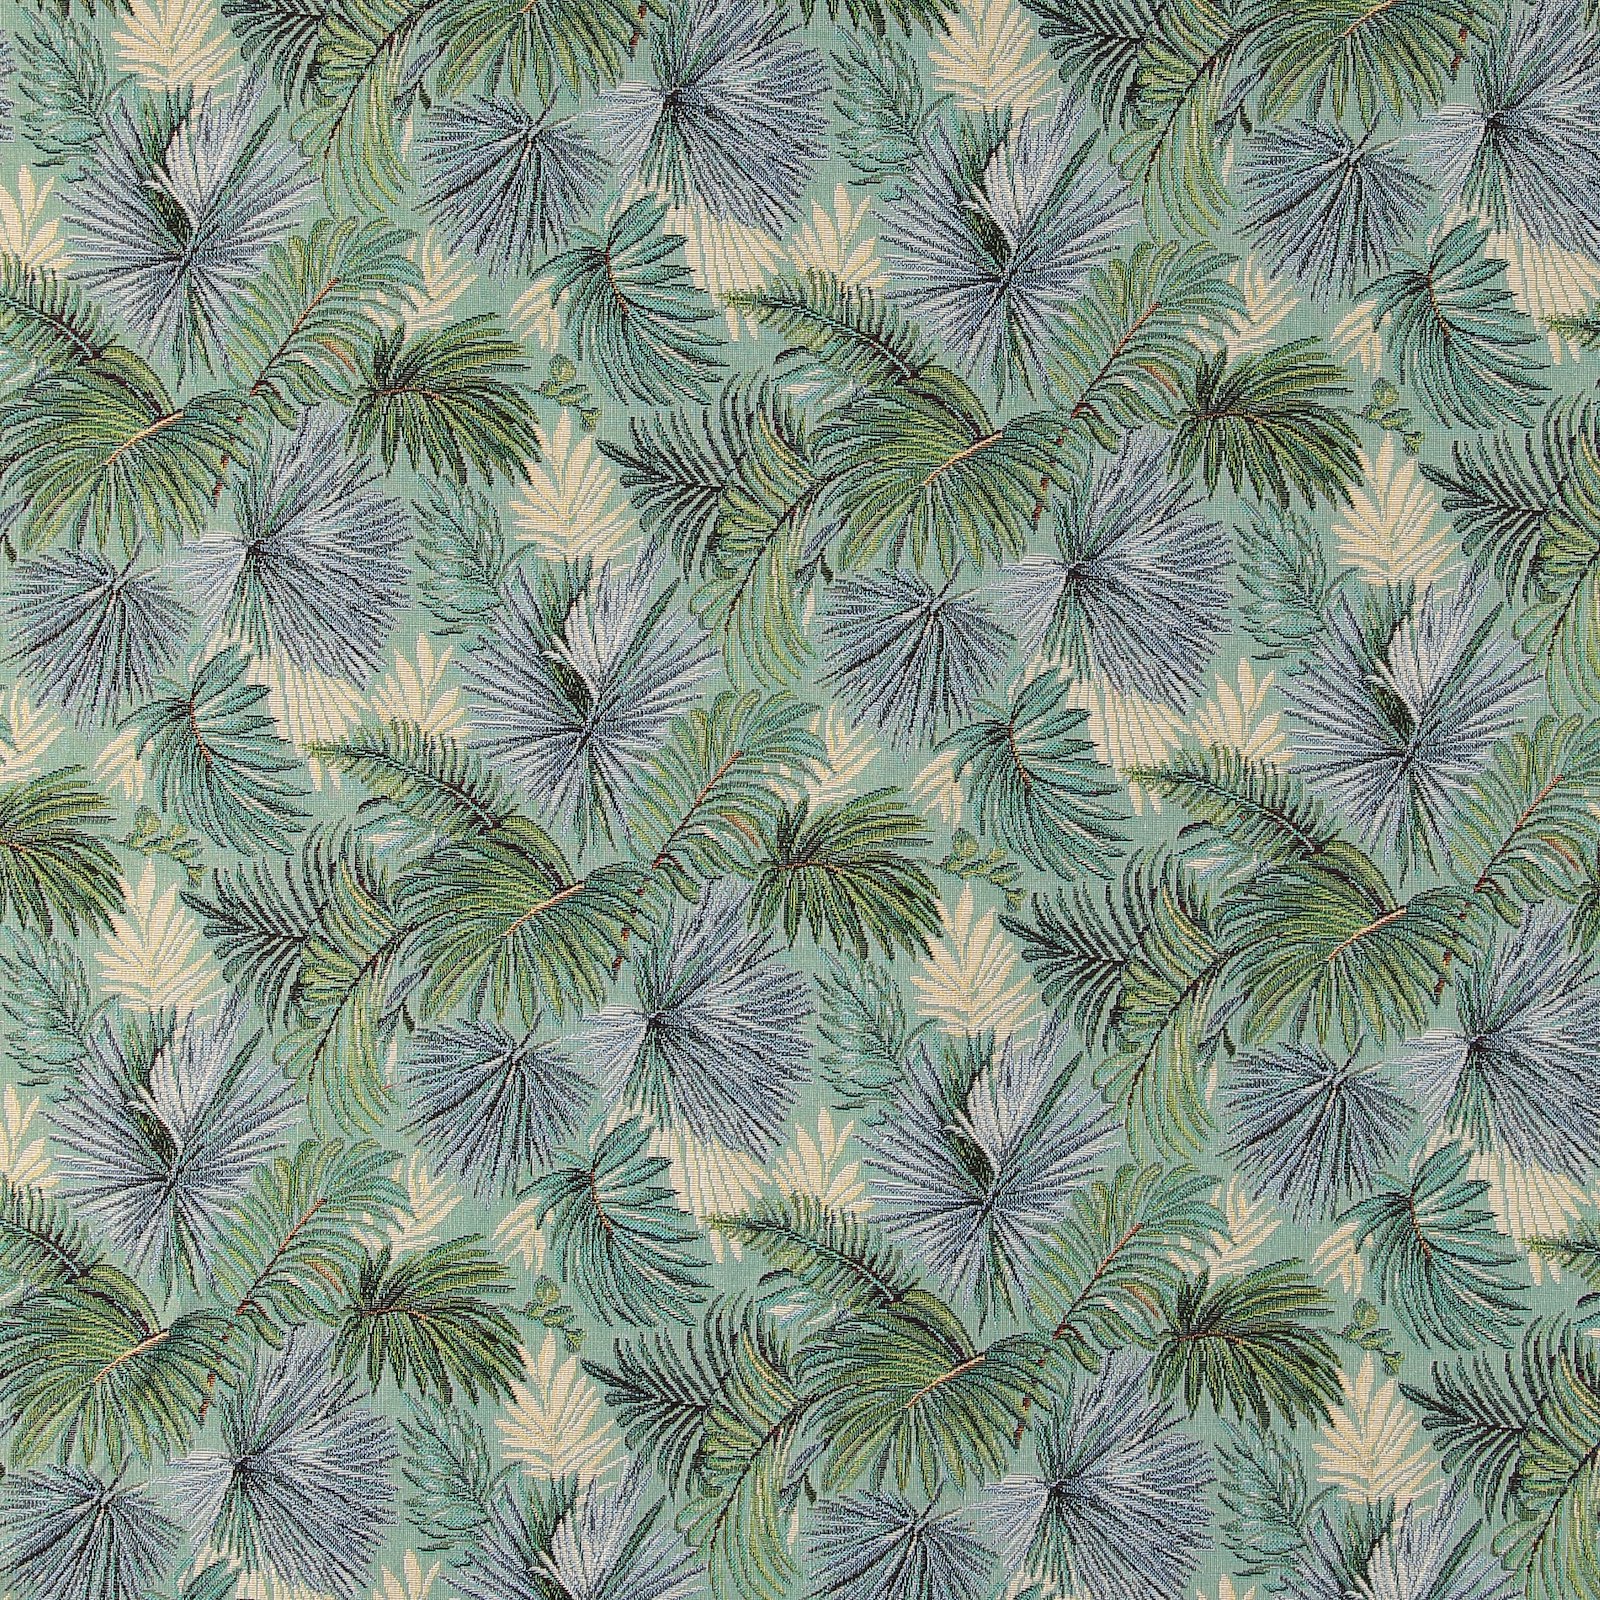 Gobelin tuquoise with palm leaves 823999_pack_lp